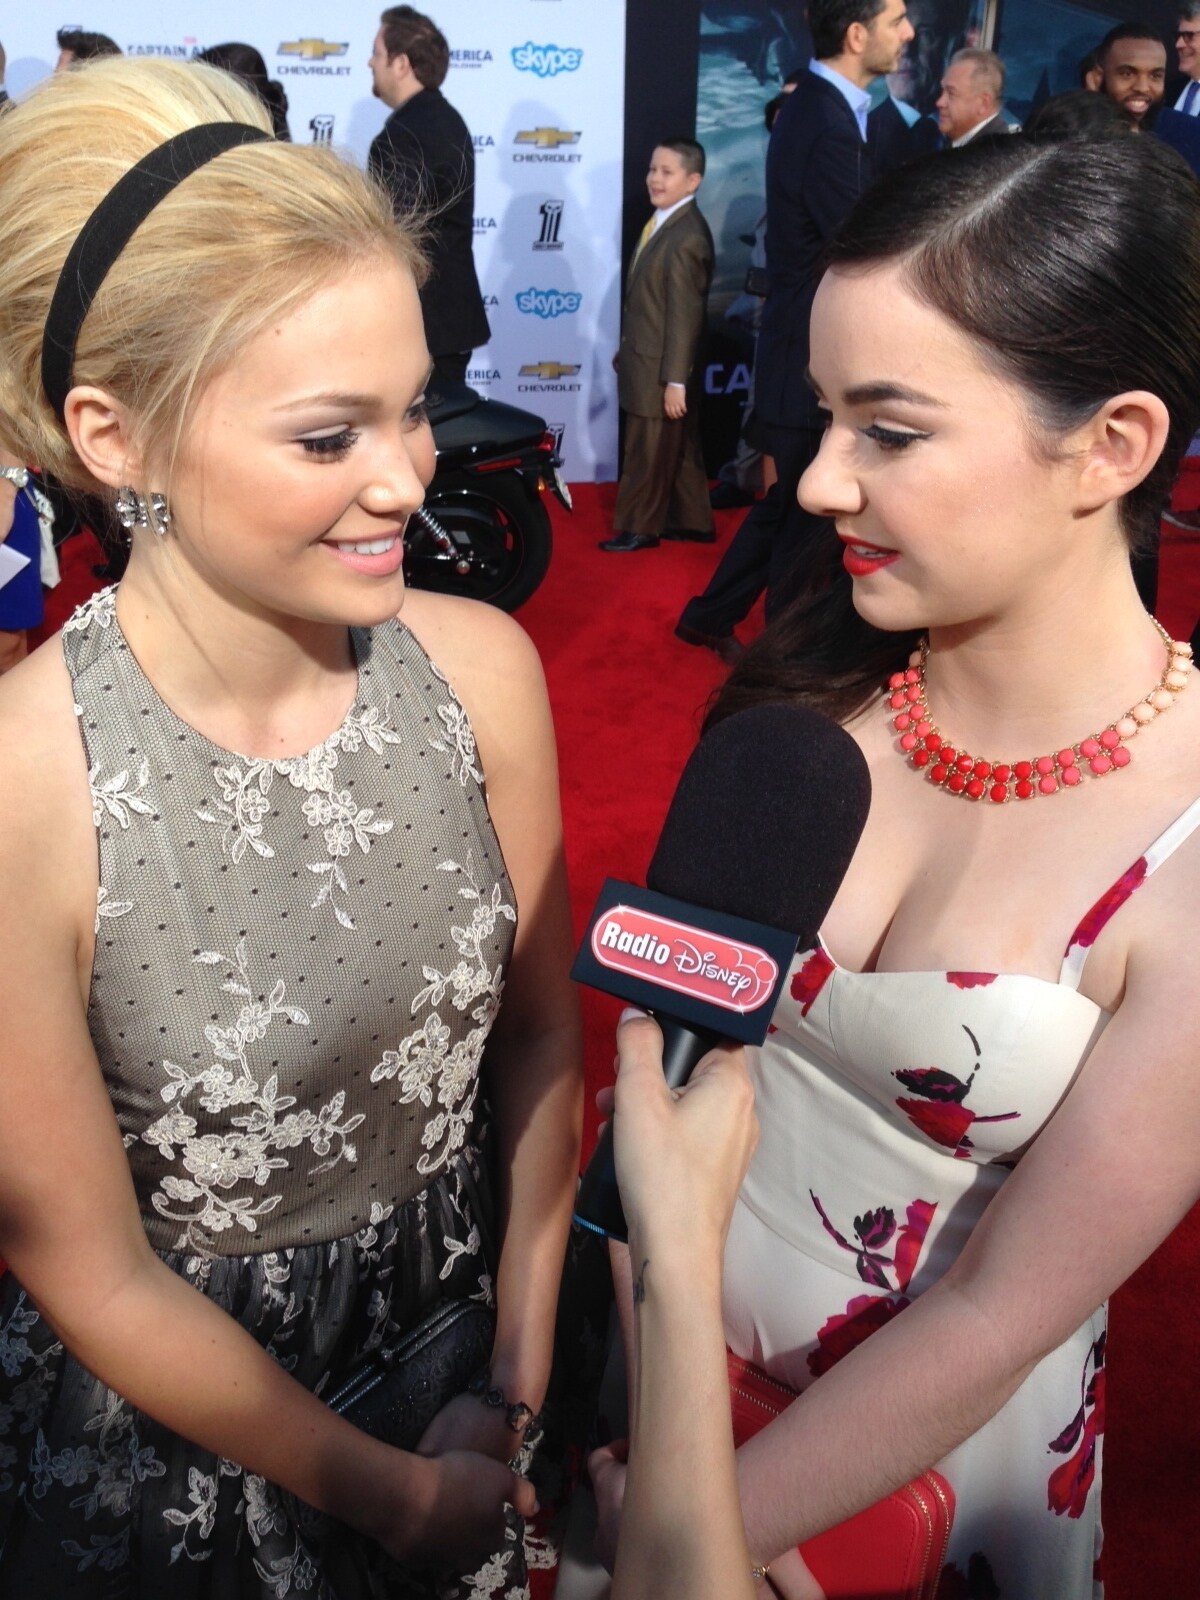 Olivia Holt and Sarah Gilman at Captain America: The Winter Soldier